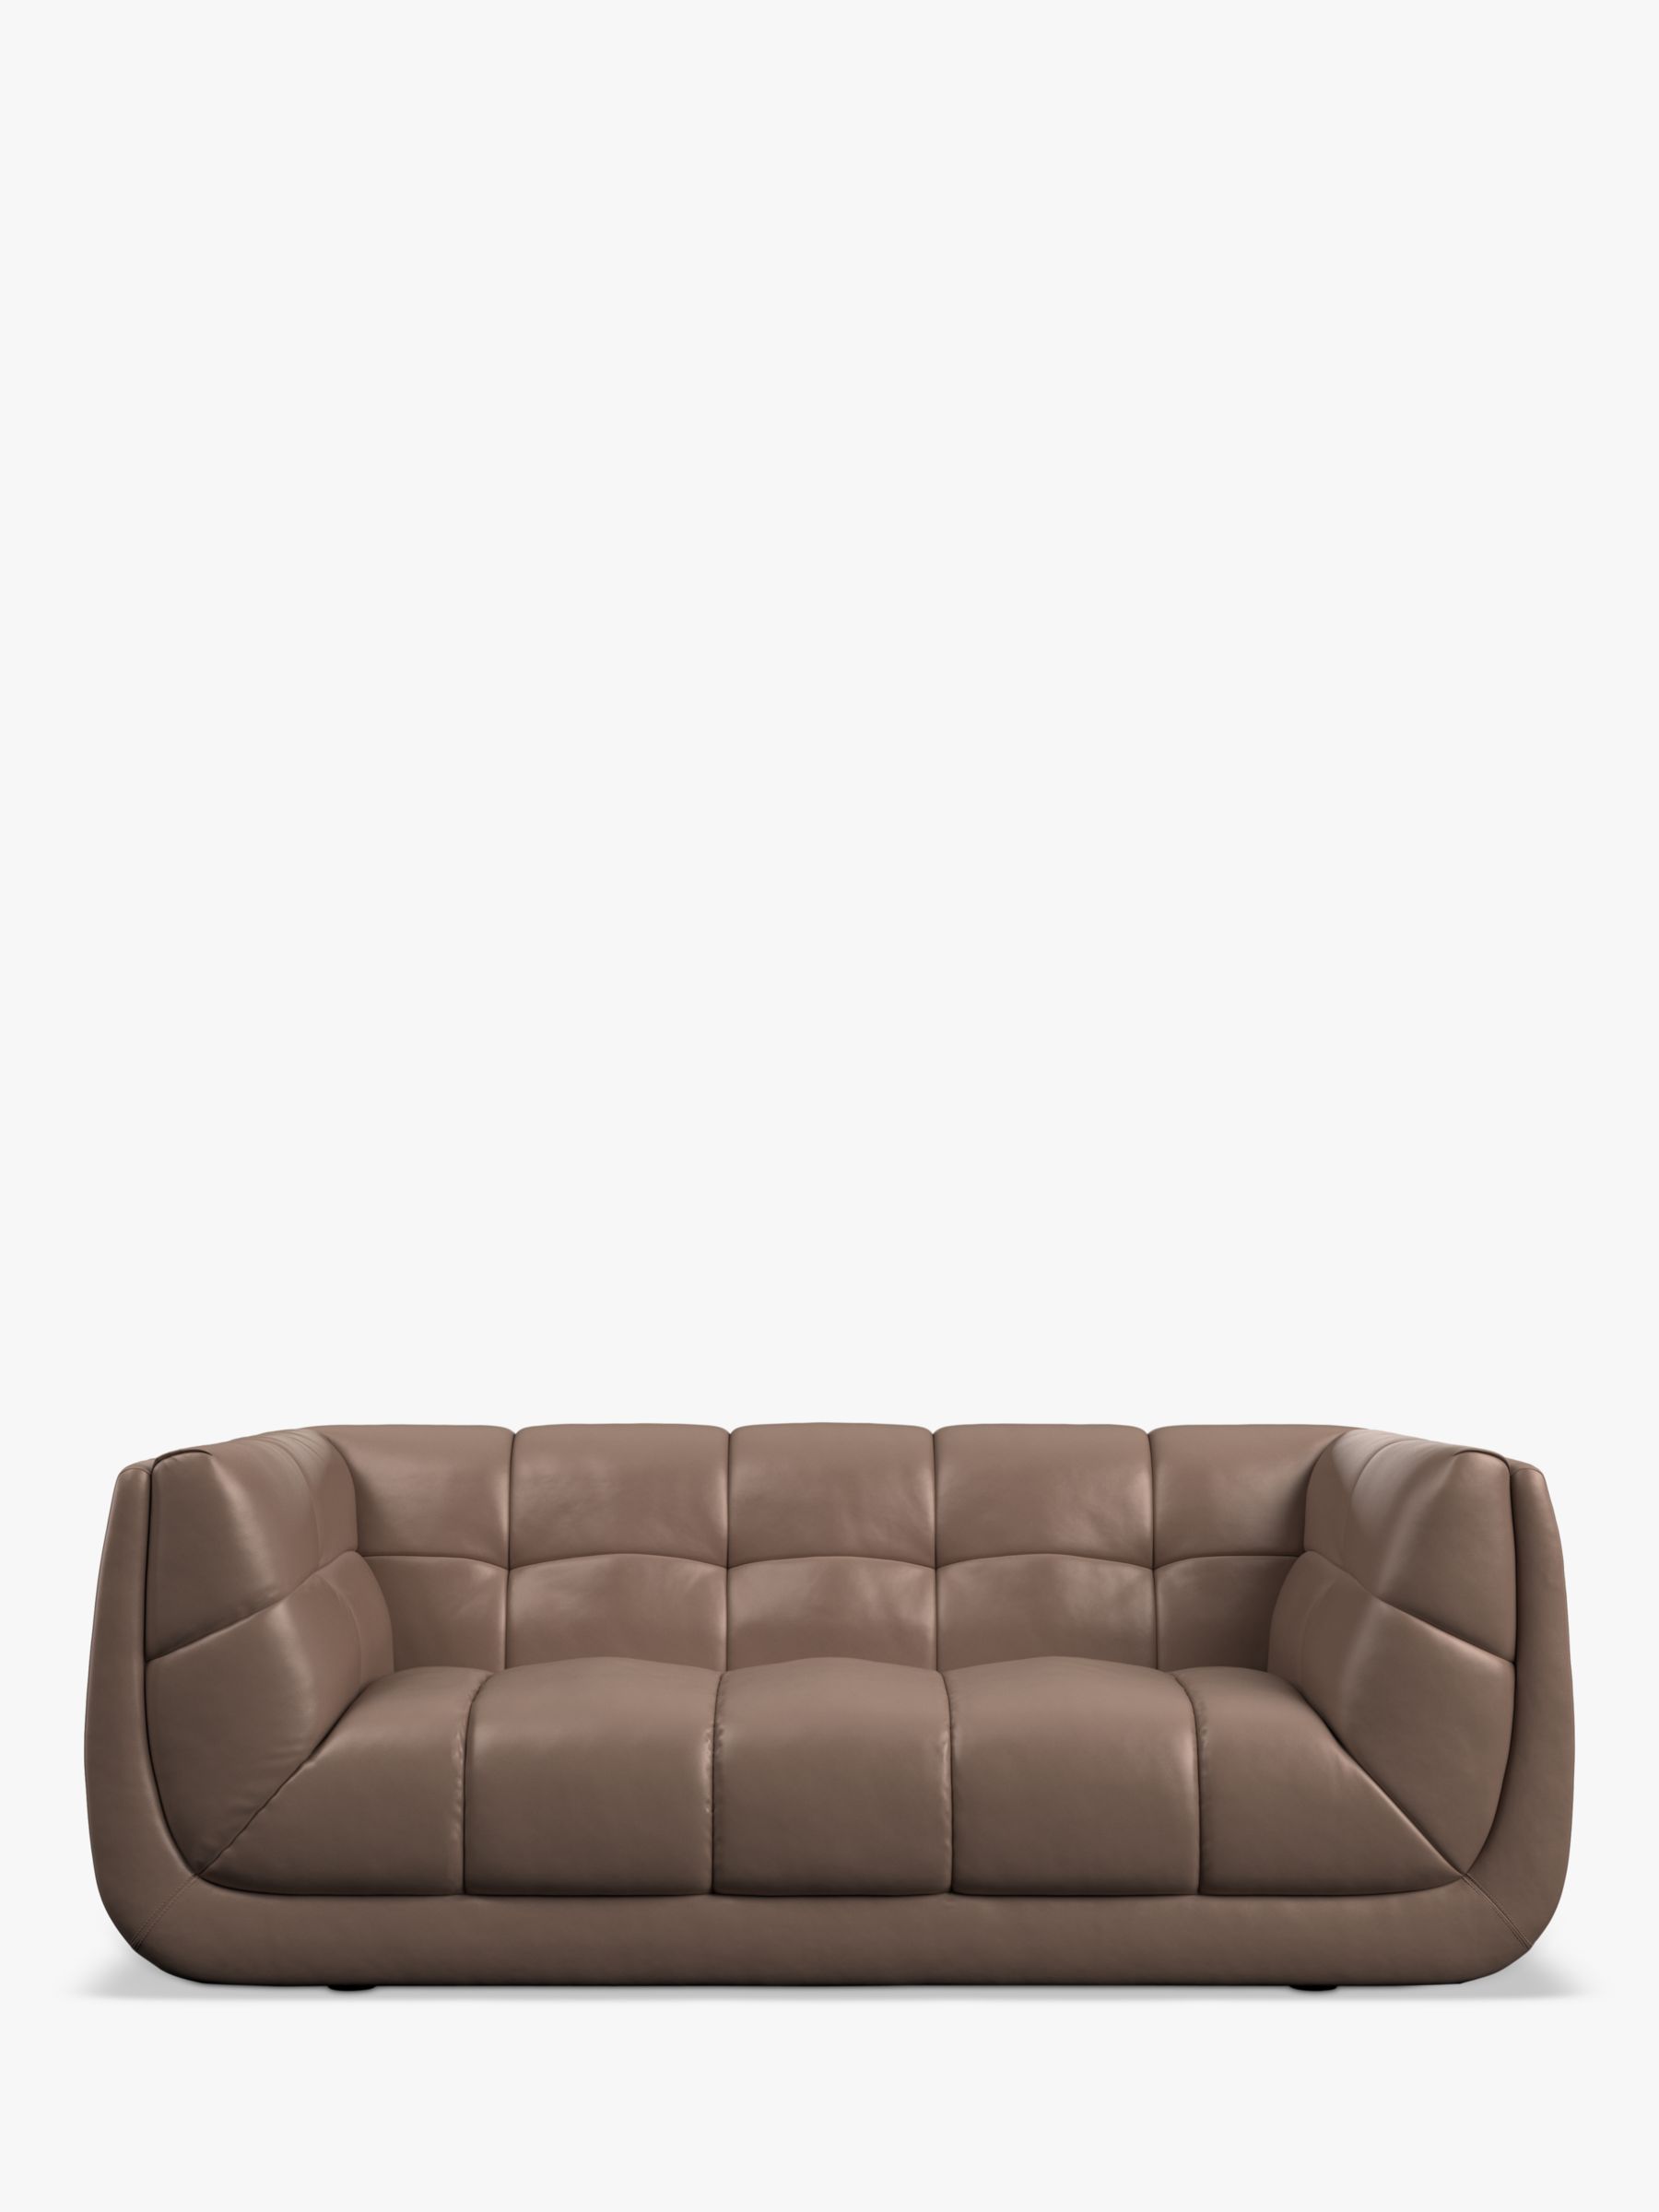 Photo of At the helm leo large 3 seater leather sofa